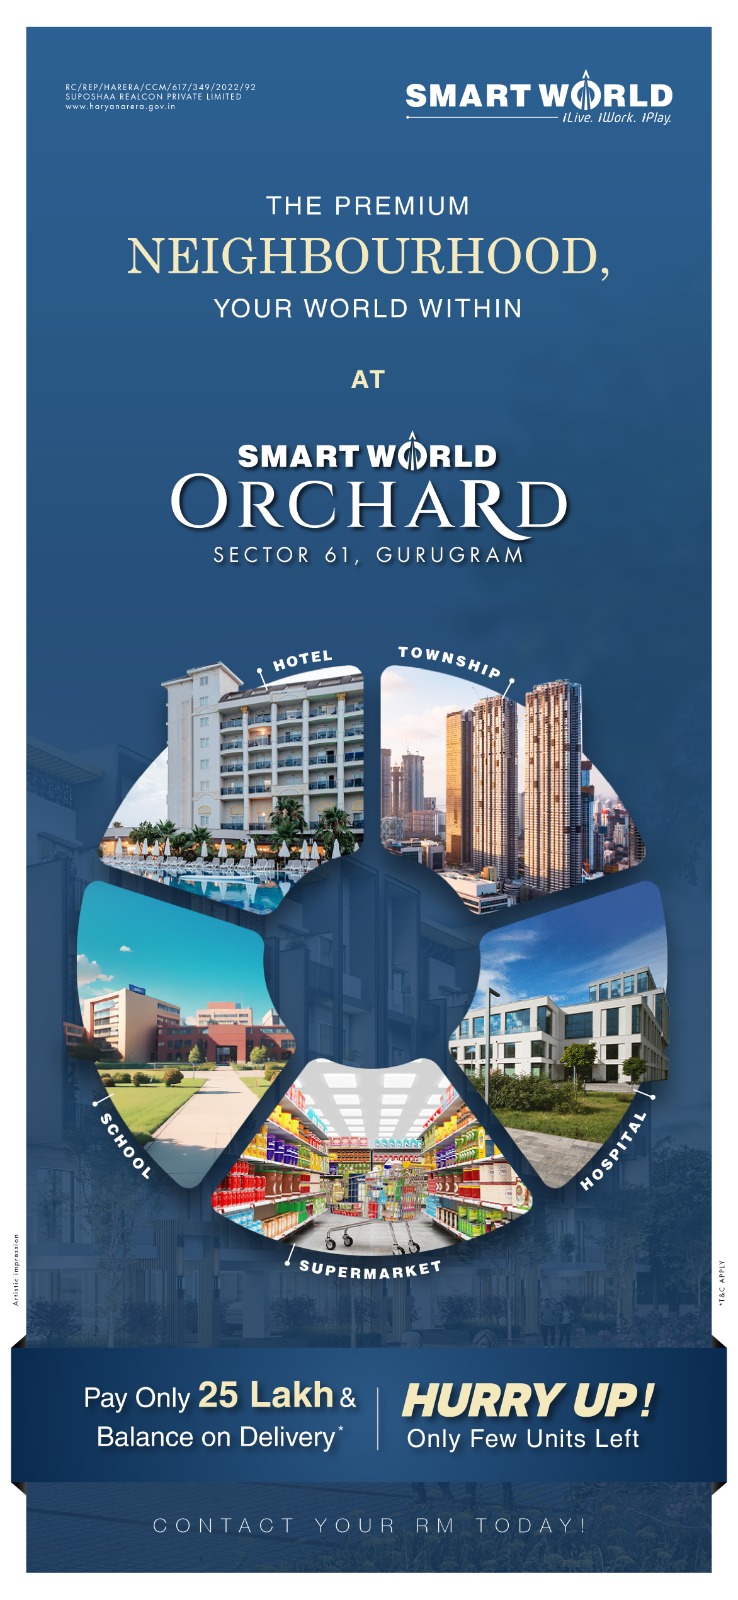 Hurry up! only few units left at Smart World Orchard in Golf Course Extension Road, Gurgaon